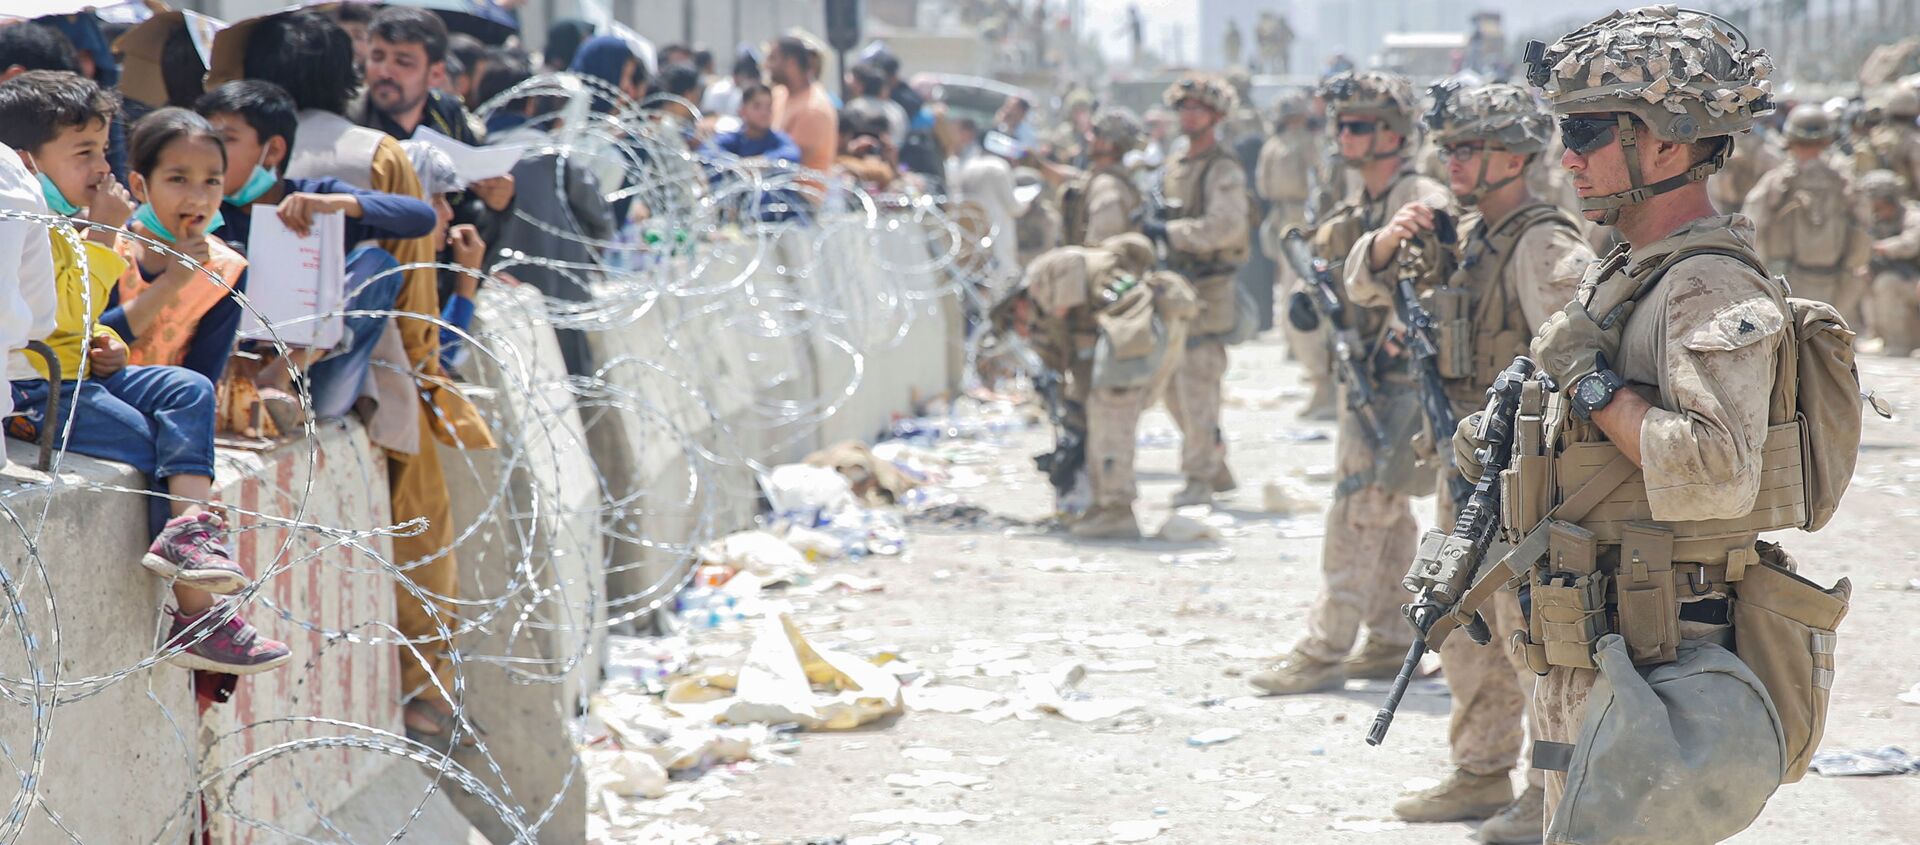 U.S. Marines with Special Purpose Marine Air-Ground Task Force - Crisis Response - Central Command, provide assistance during an evacuation at Hamid Karzai International Airport, in Kabul, Afghanistan, August 20, 2021. - Sputnik International, 1920